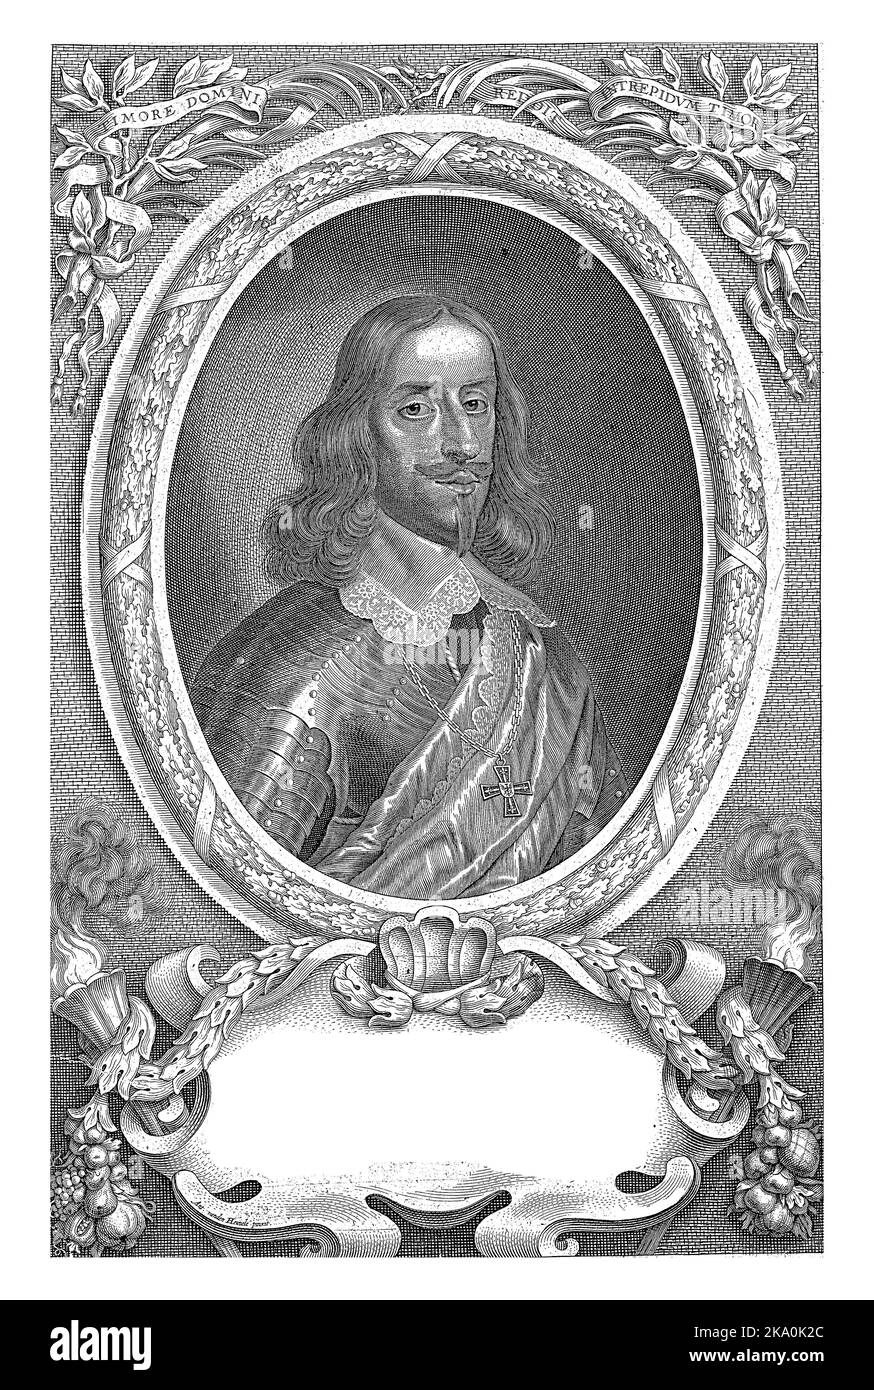 Portrait of Archduke Leopold William of Austria, Governor of the Southern Netherlands, in oval frame with olive and palm branches and burning torches. Stock Photo